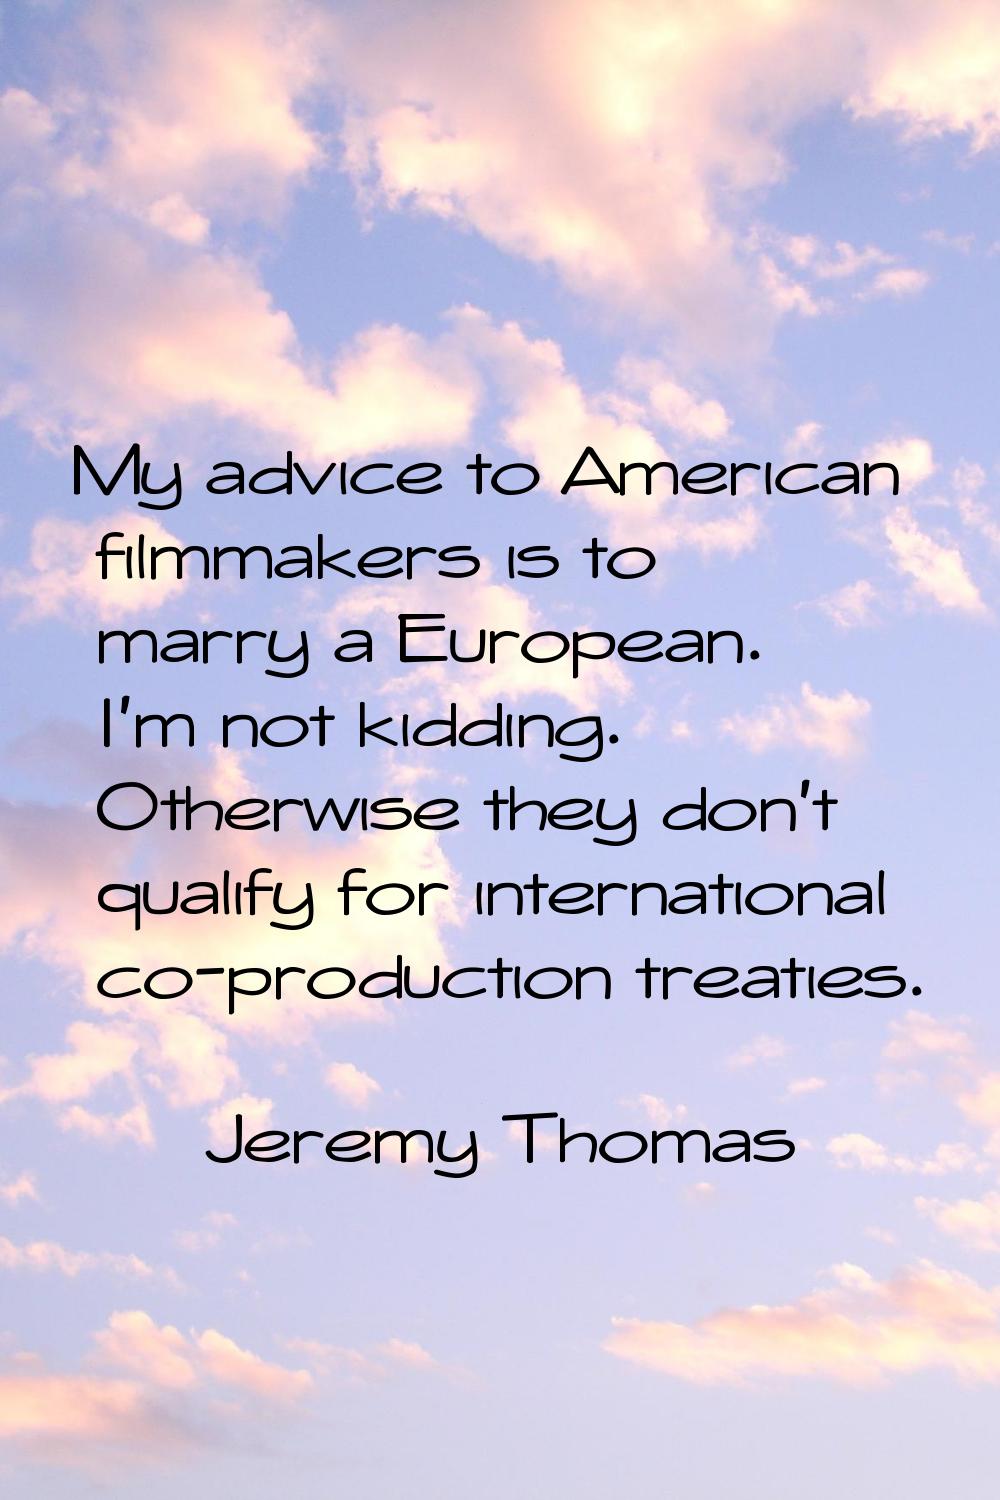 My advice to American filmmakers is to marry a European. I'm not kidding. Otherwise they don't qual